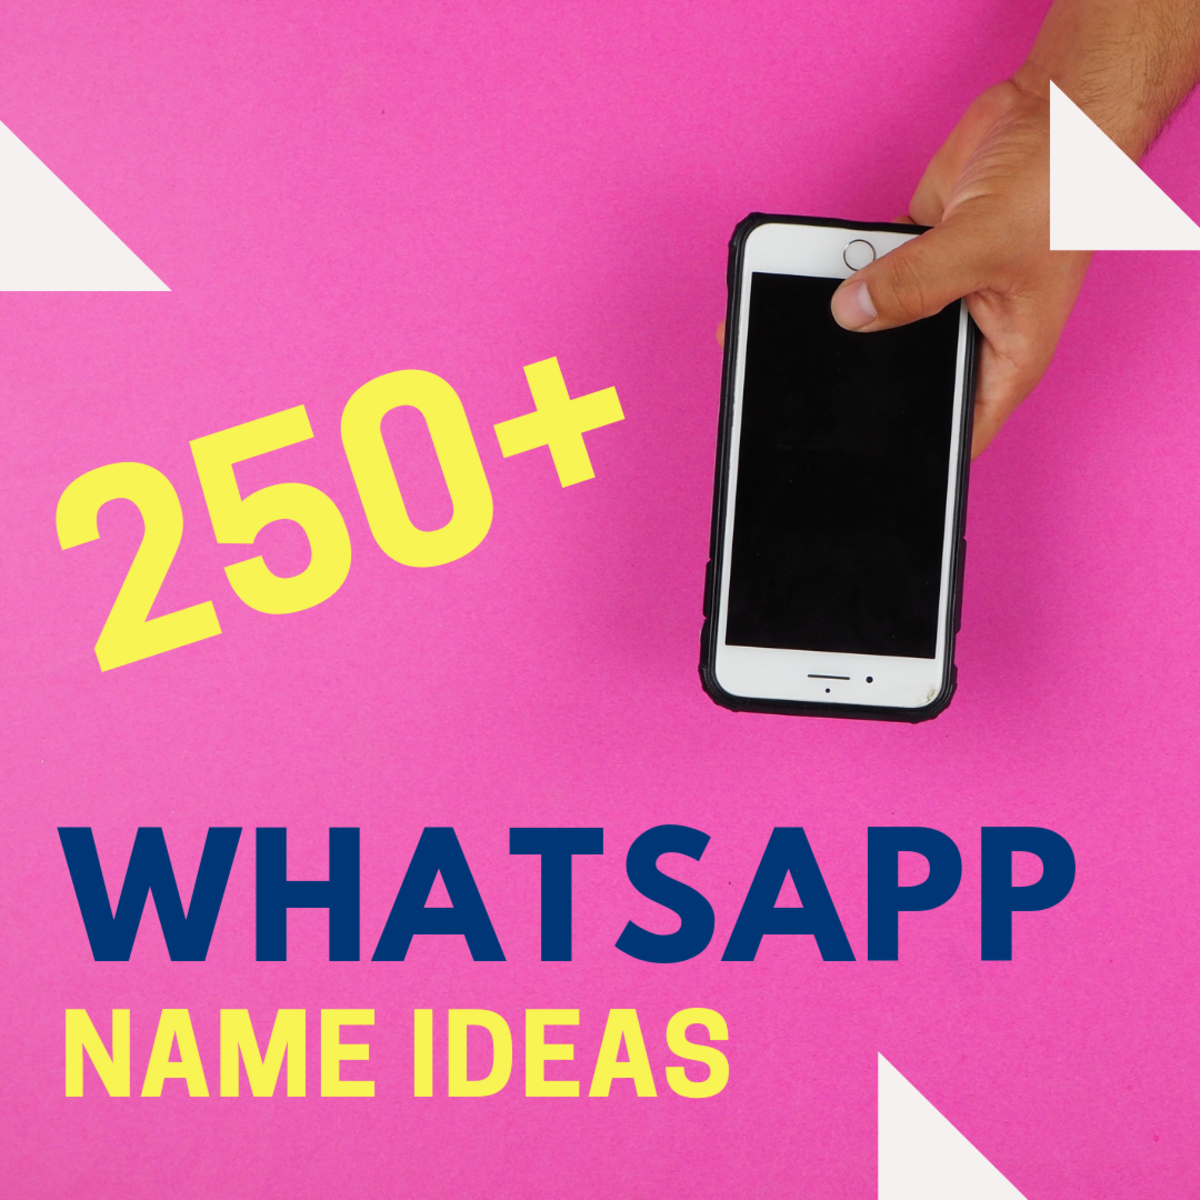 250 Whatsapp Group Name Ideas Funny Cool Ideas For Family And Friends Turbofuture